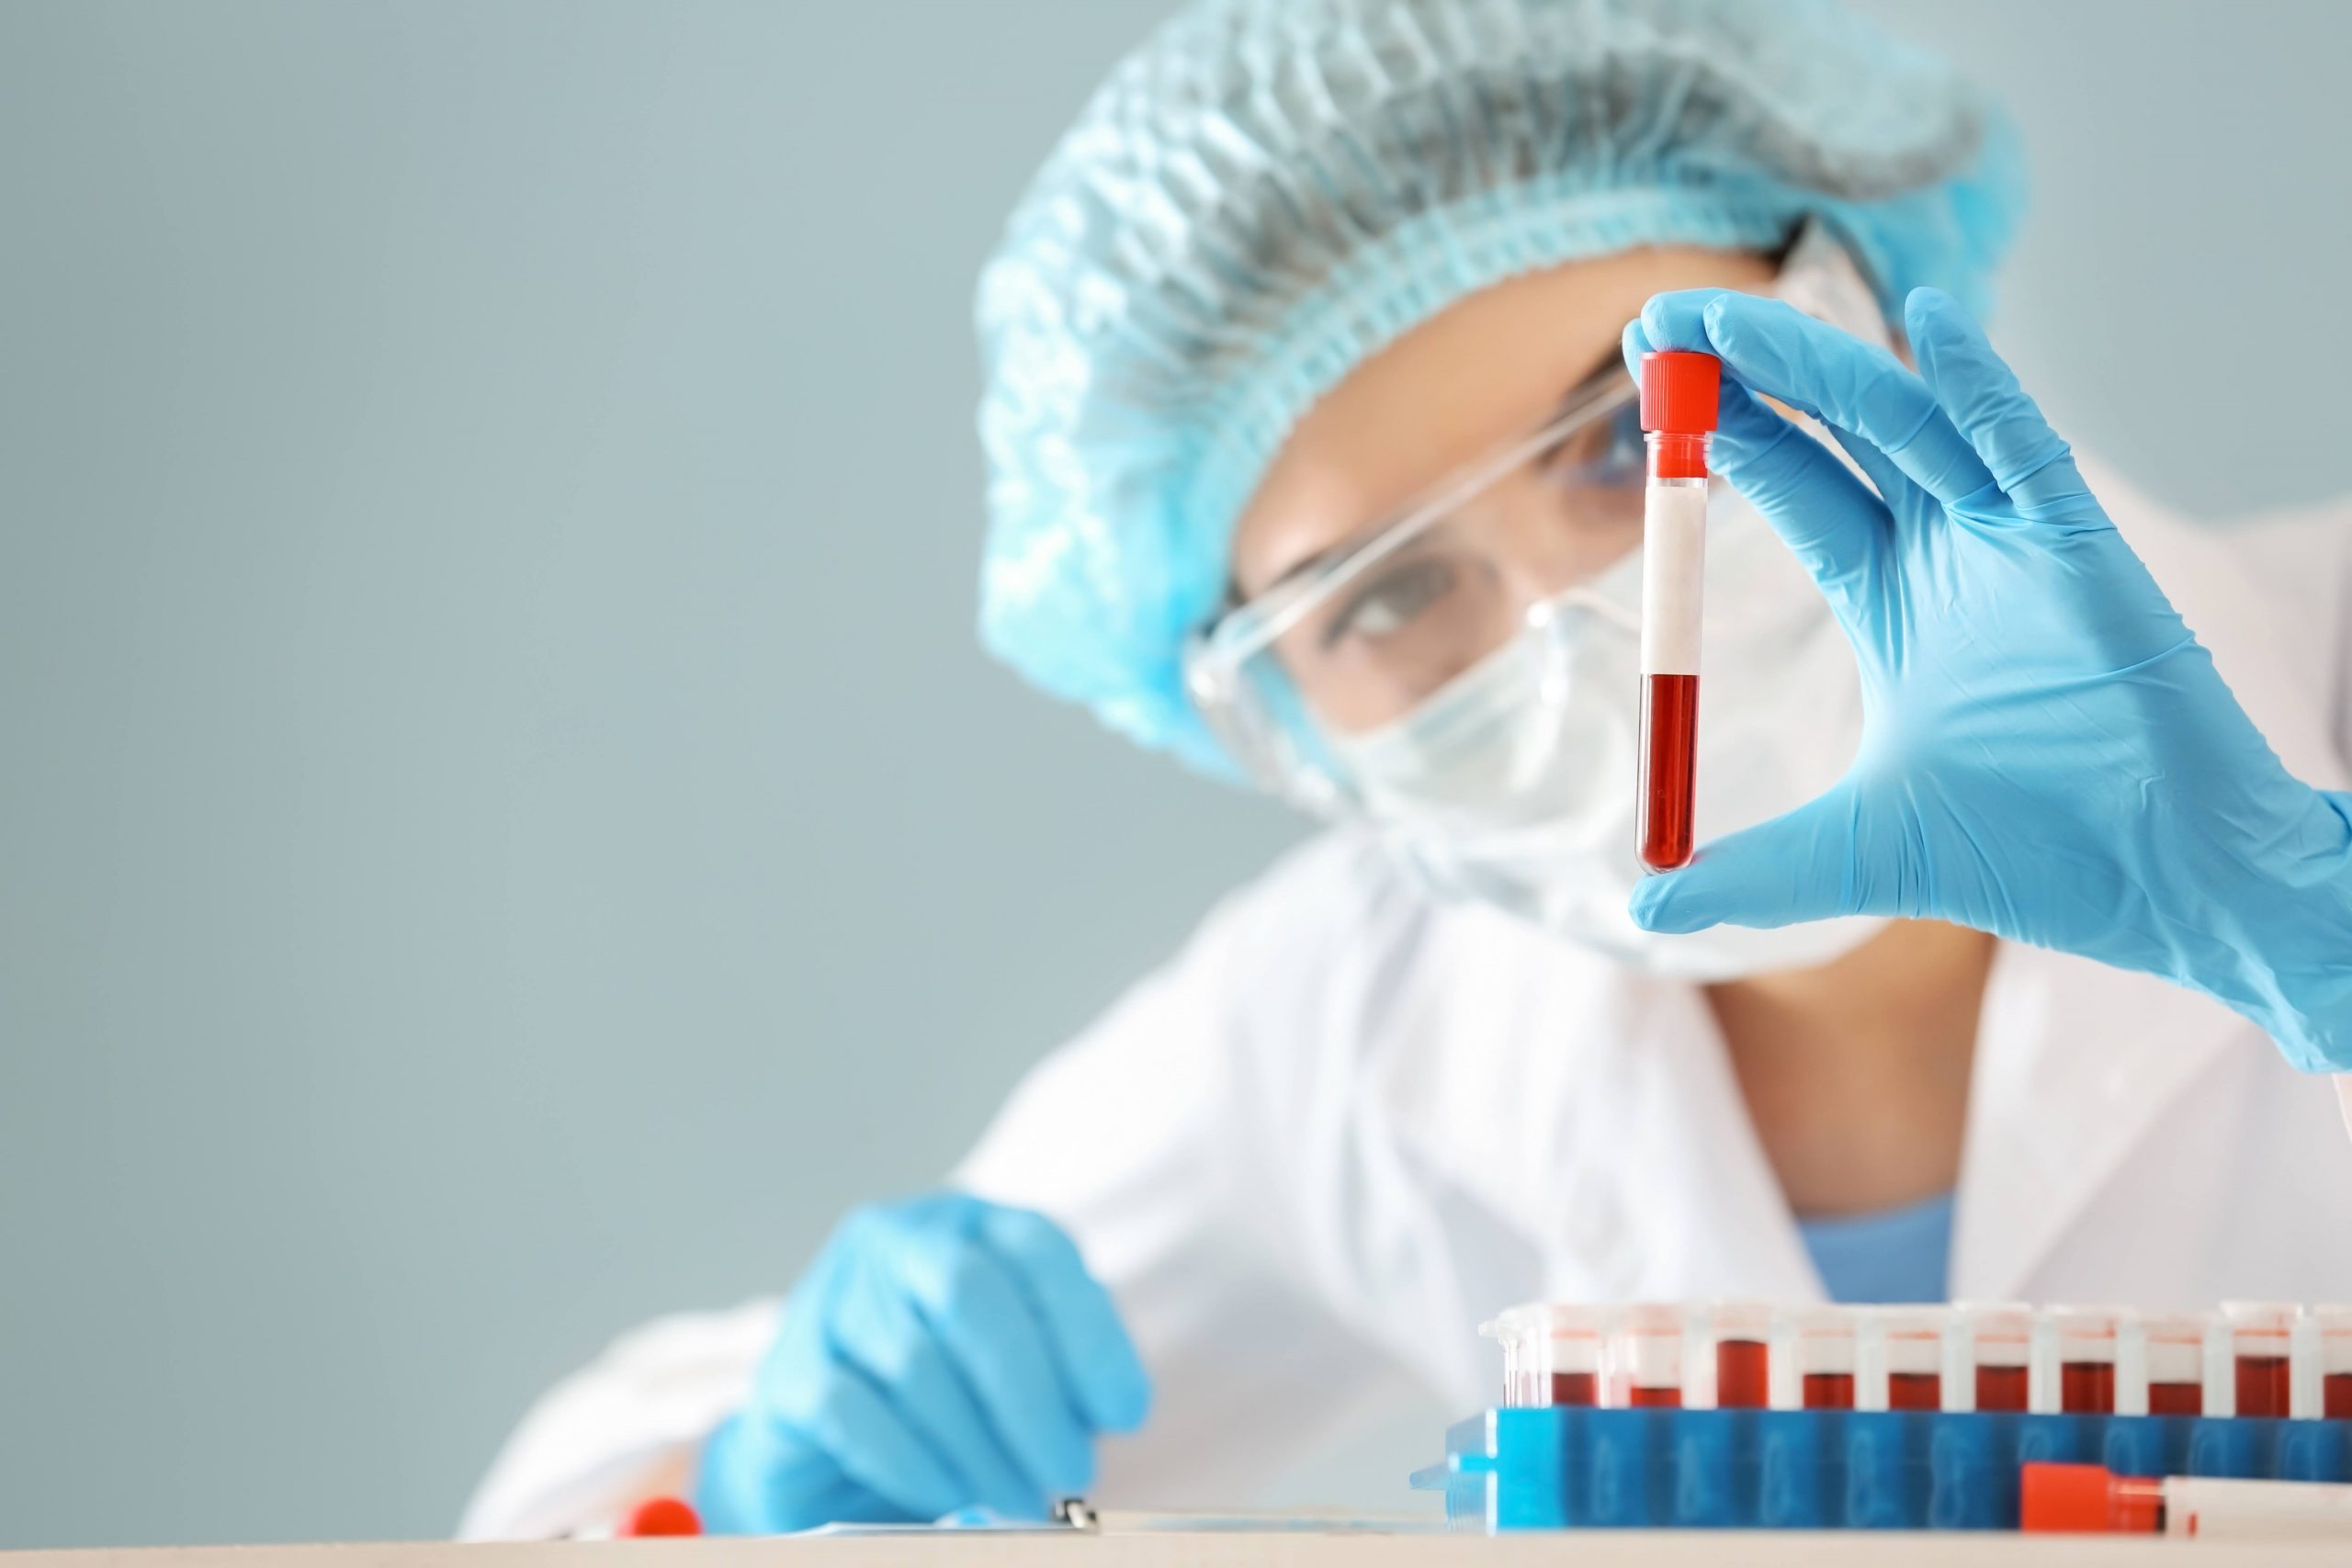 lab technician holding up a vile of blood and examining it